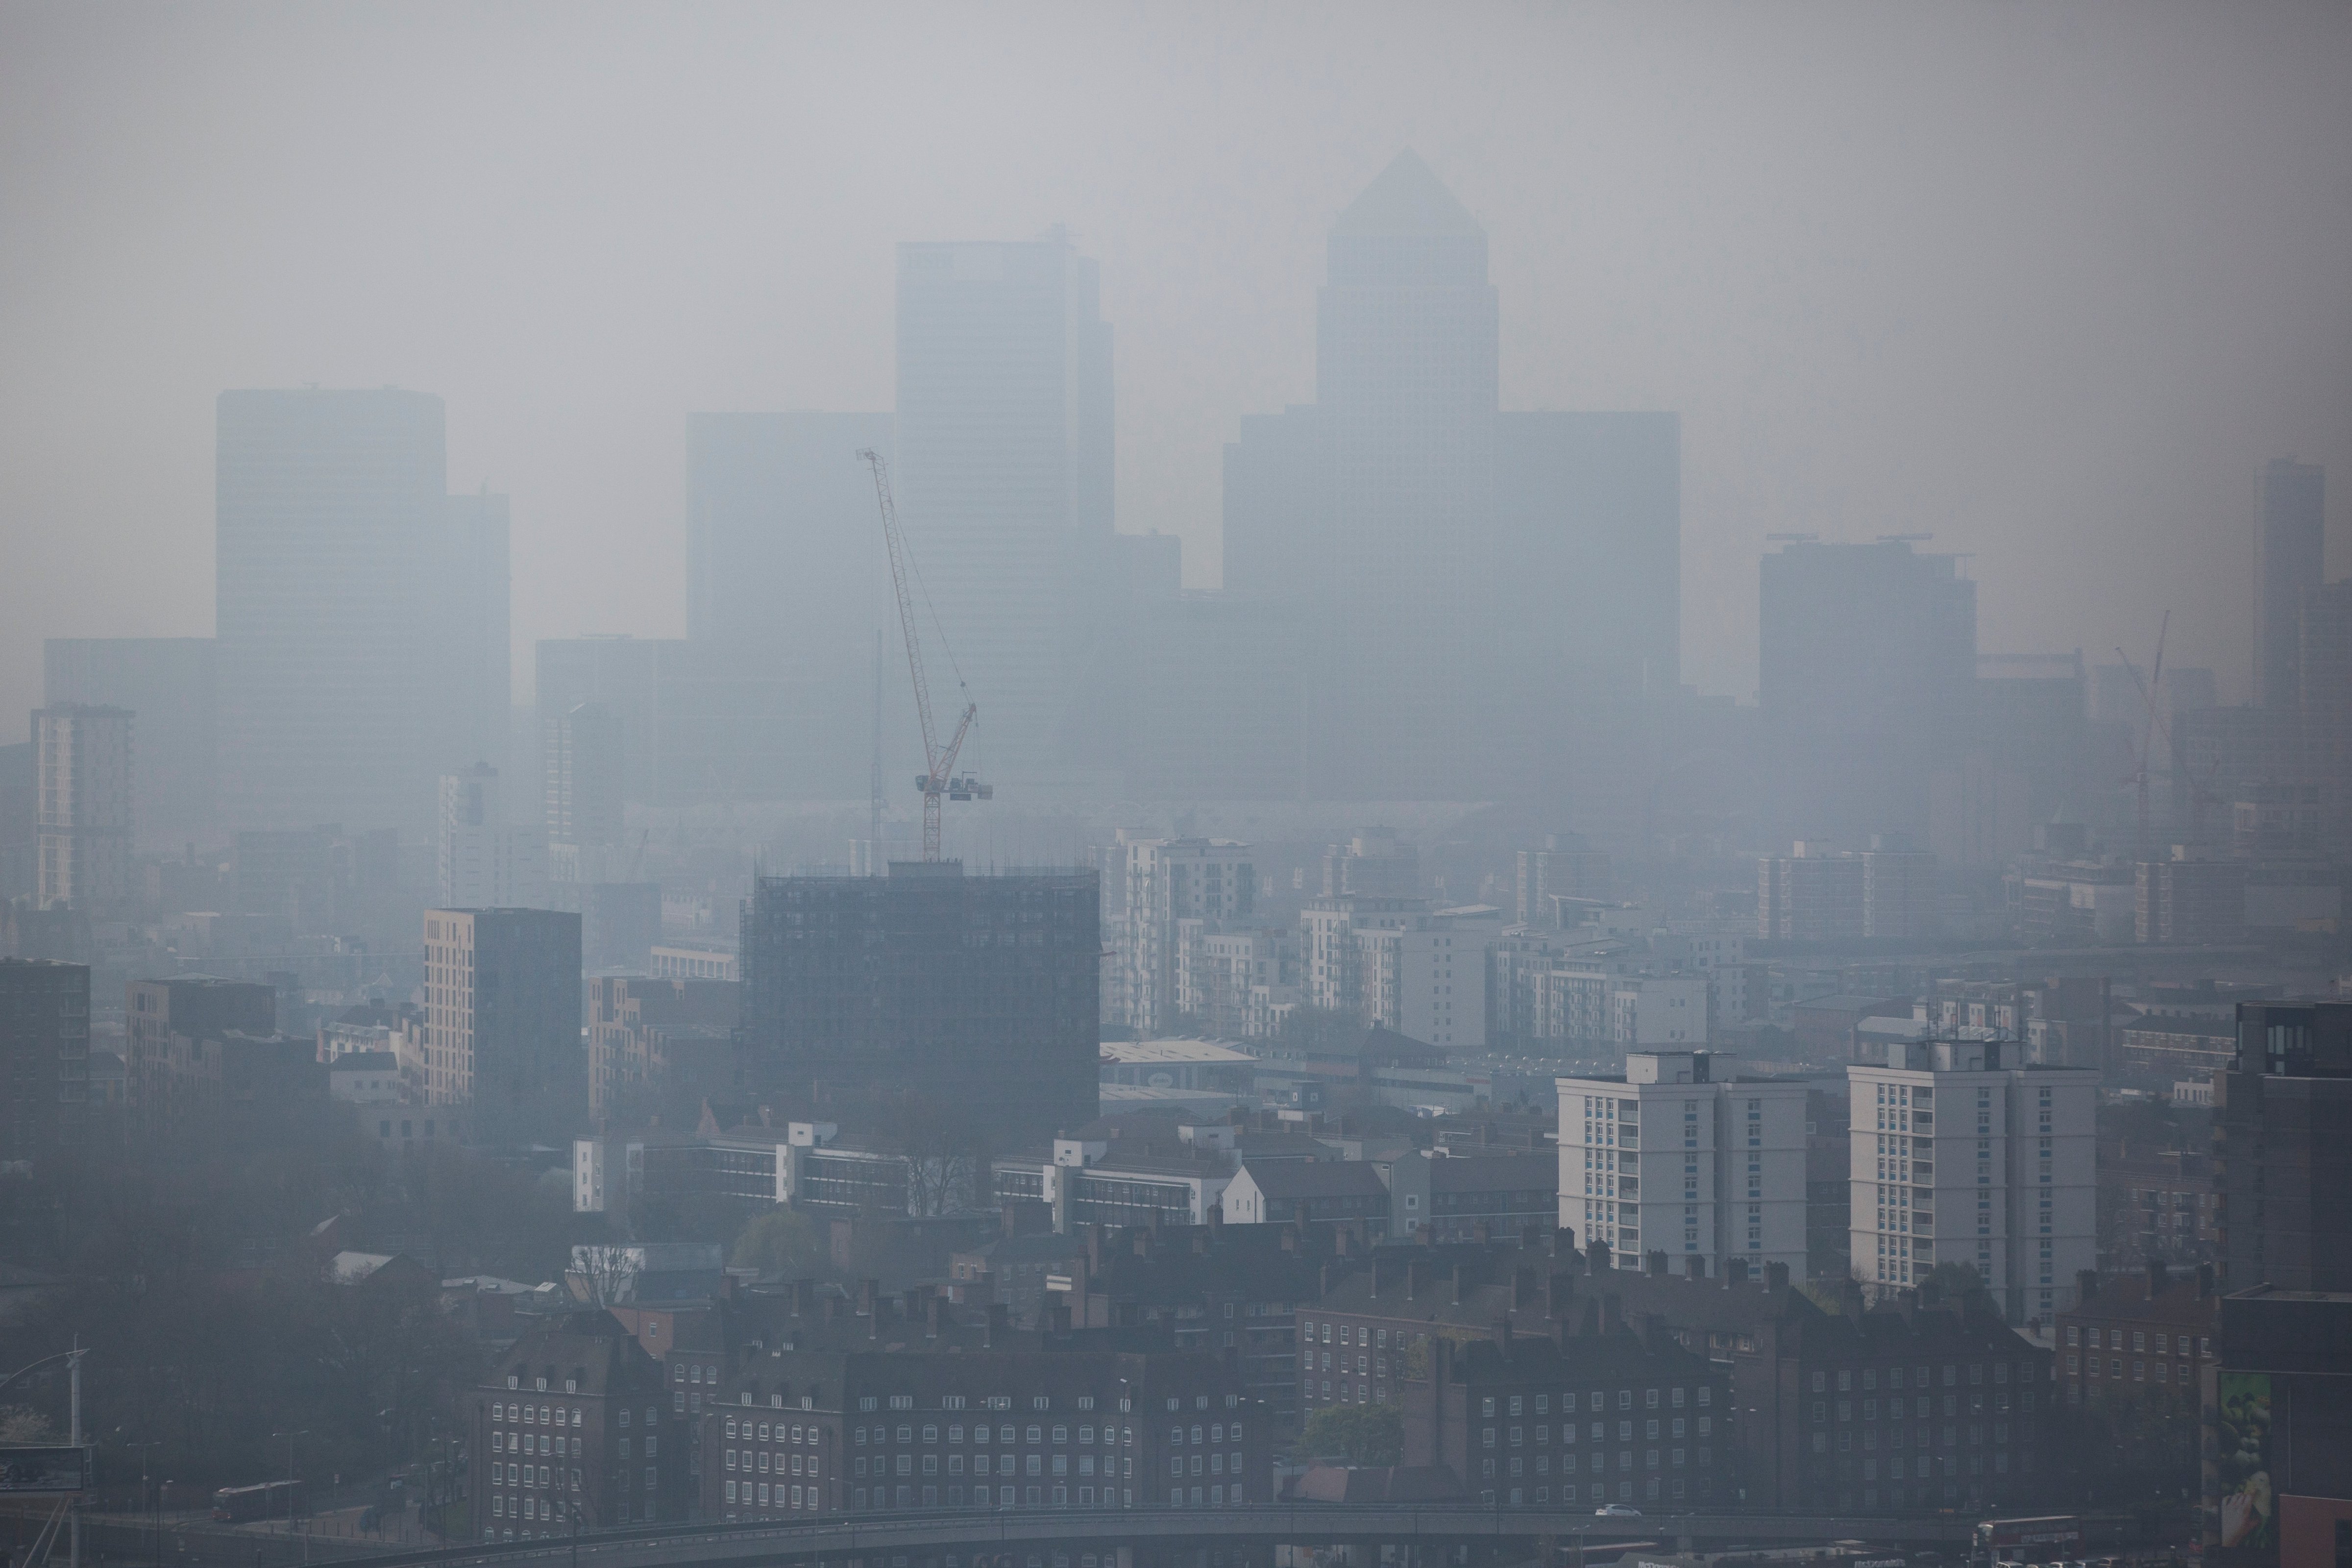 A general view through smog of the Canary Wharf financial district on April 2, 2014 in London, England. (Dan Kitwood—Getty Images)